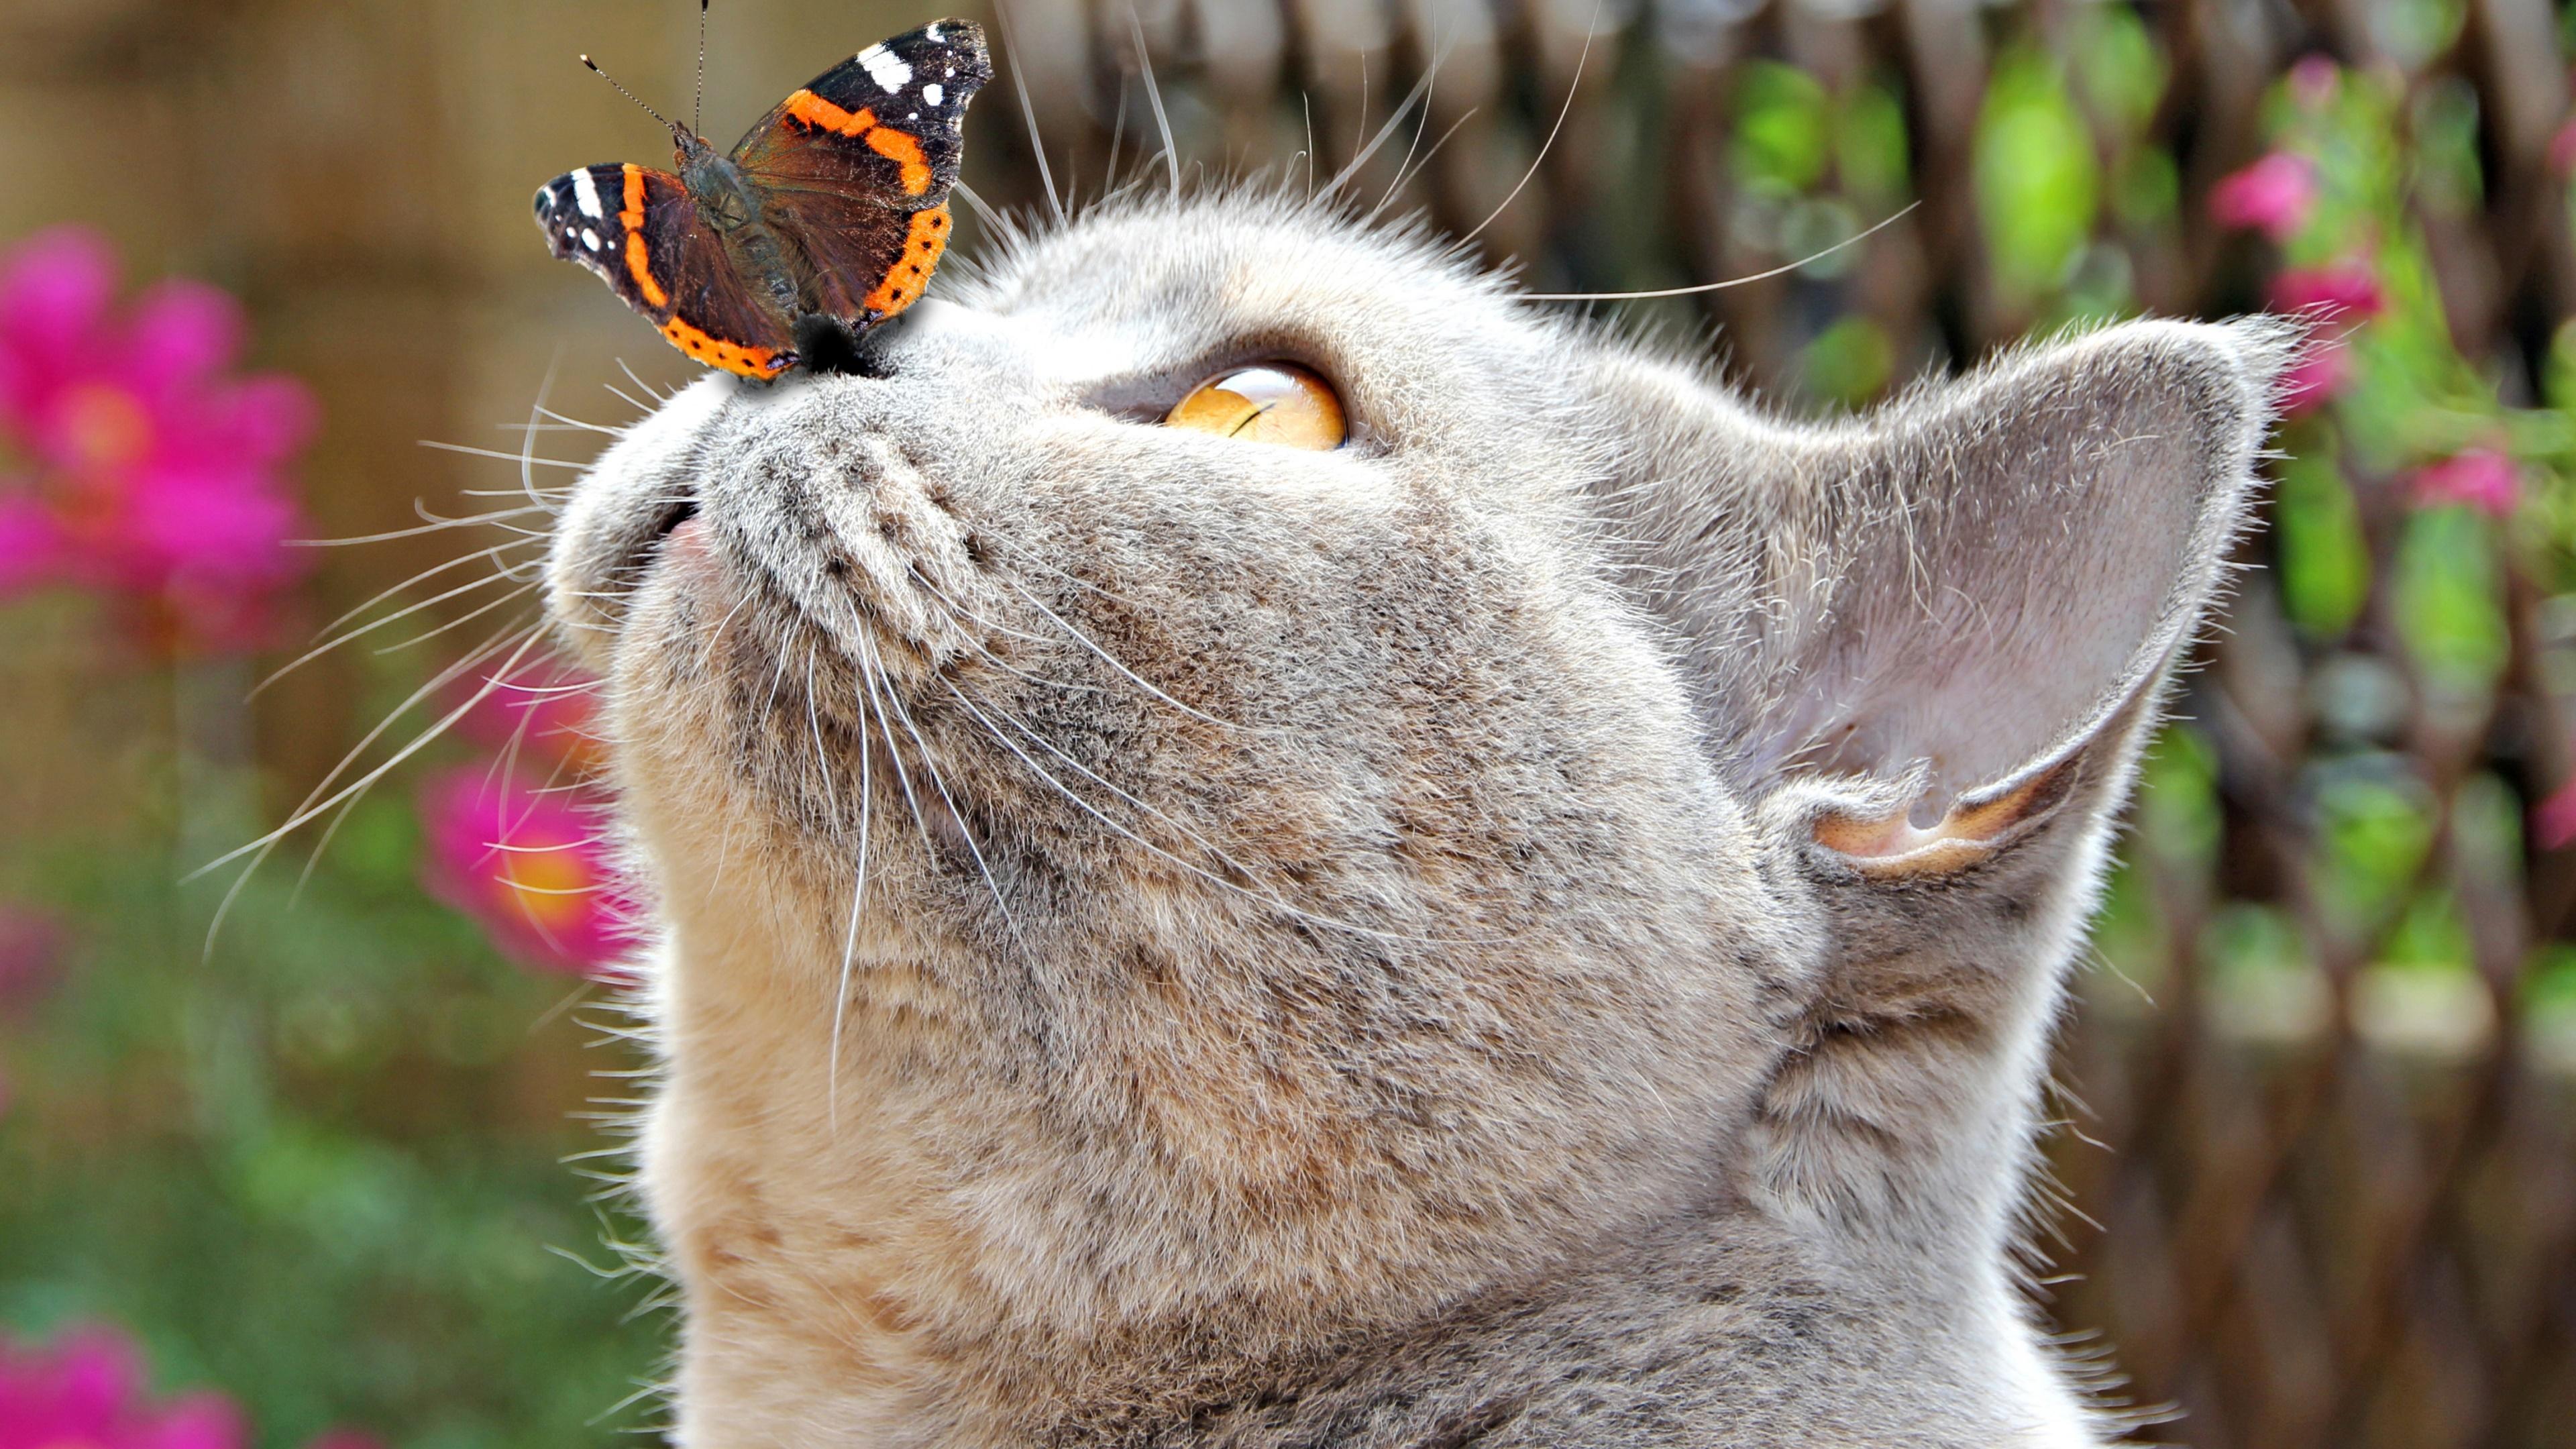 Butterfly on Cat's Nose 4k Ultra HD Wallpaper. Background Image